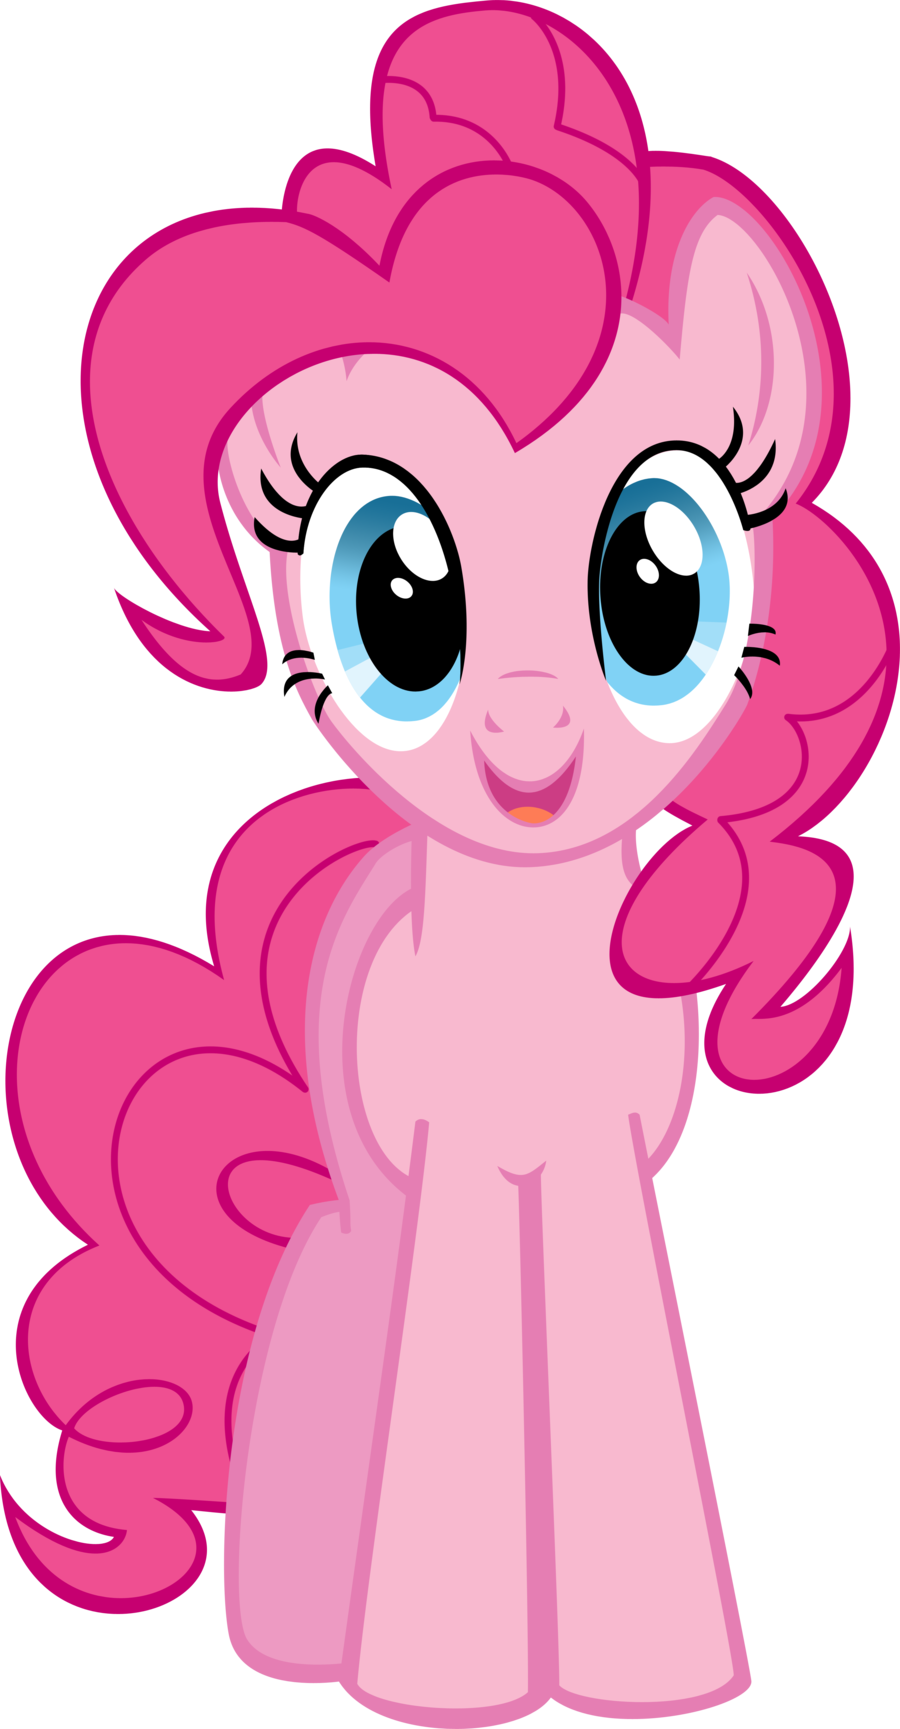 http://img2.wikia.nocookie.net/__cb20130930231853/mlp/es/images/a/aa/Pinkie_pie.png